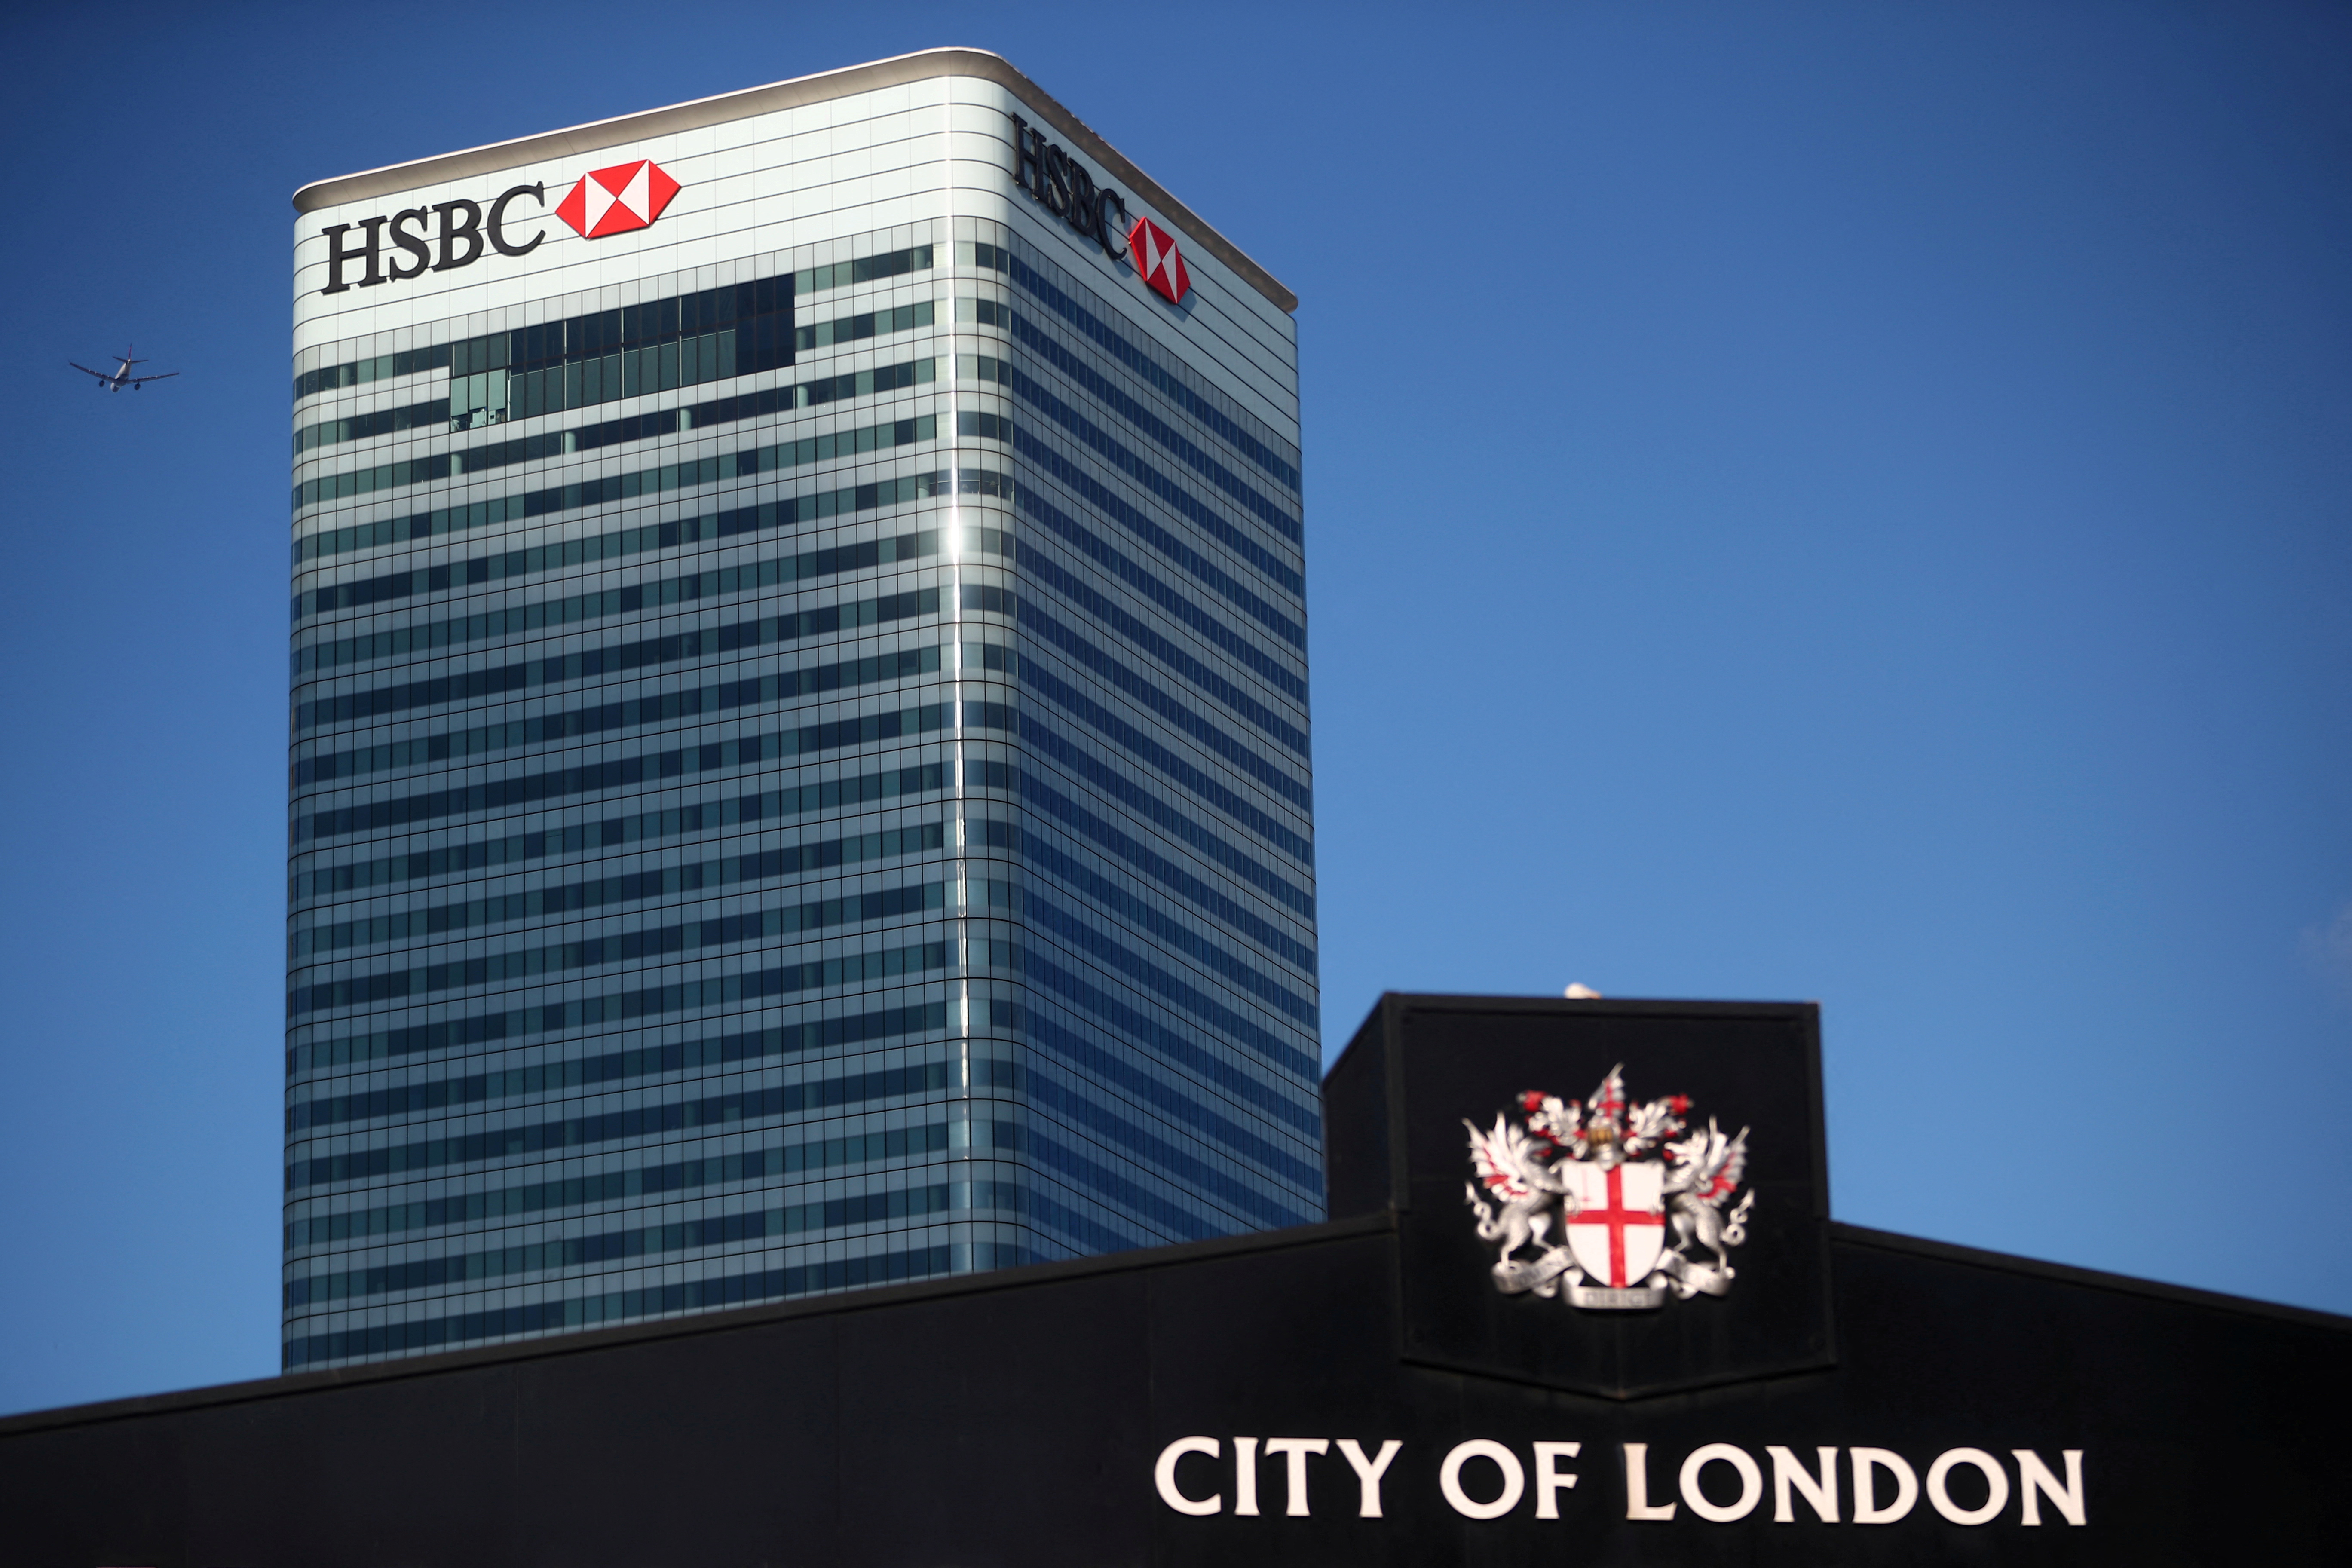 HSBC's building in Canary Wharf is seen behind a City of London sign outside Billingsgate Market in London